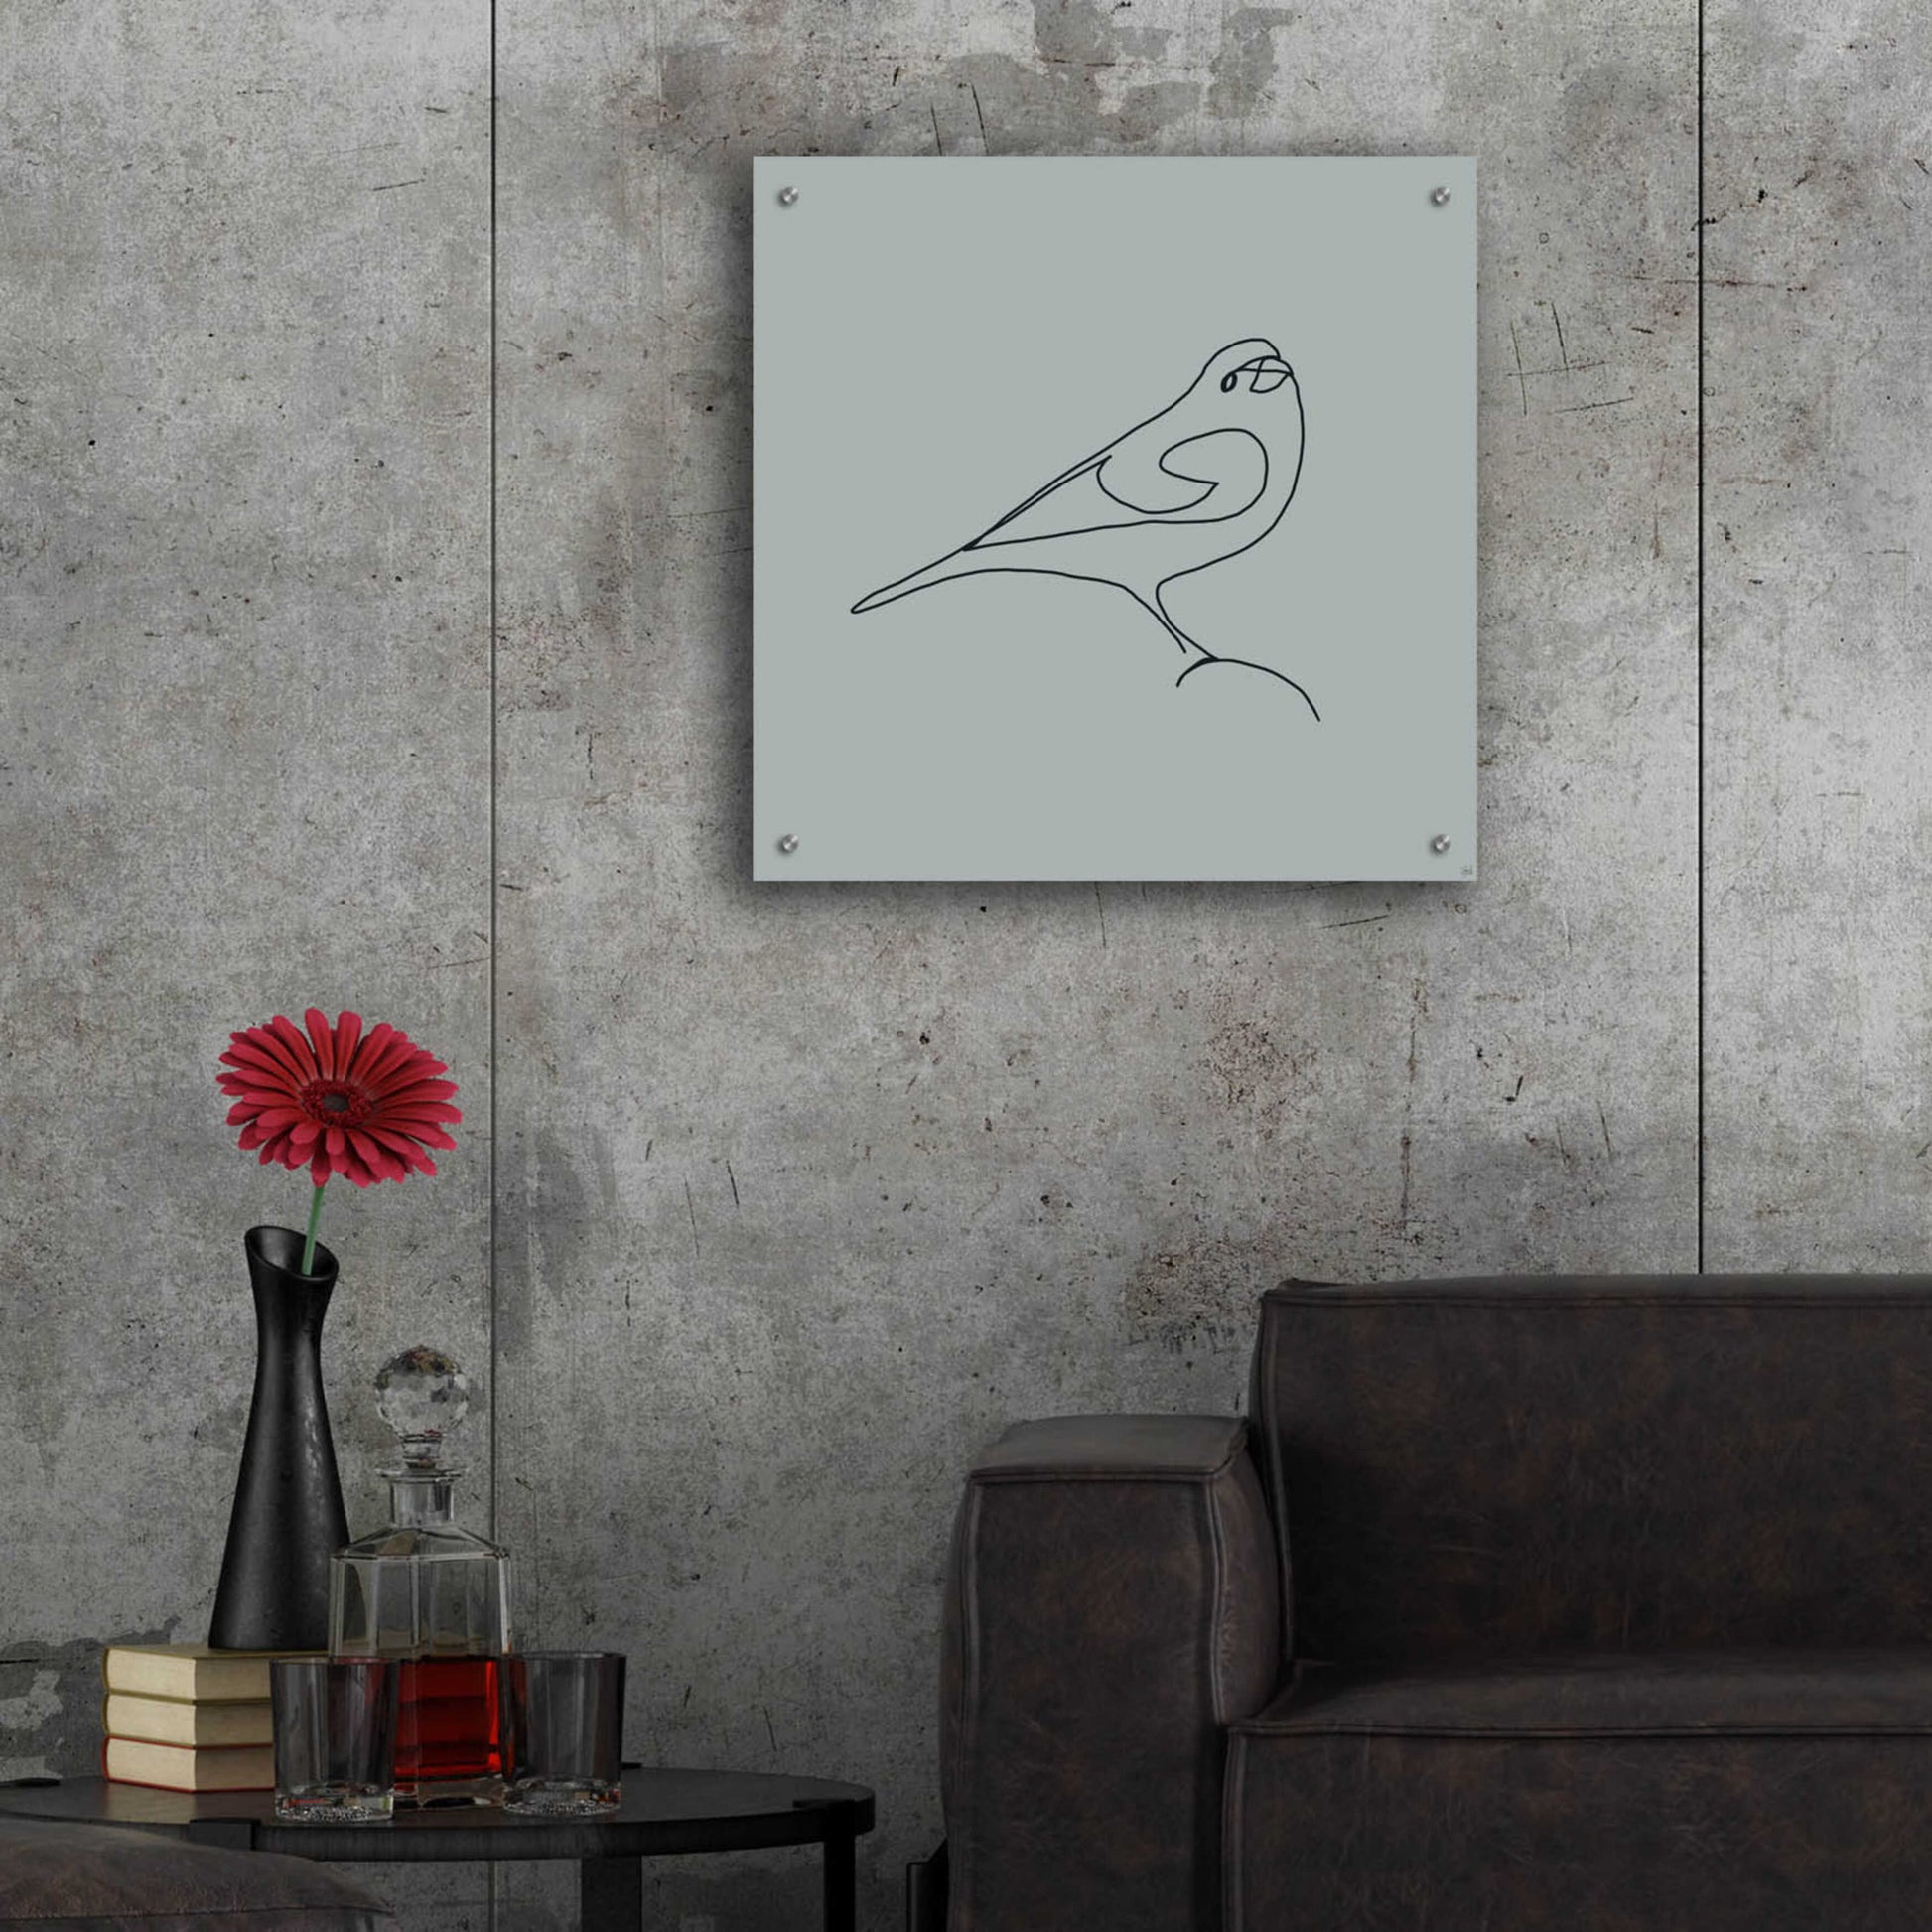 Epic Art 'Line Bird 1' by Line and Brush, Acrylic Glass Wall Art,24x24